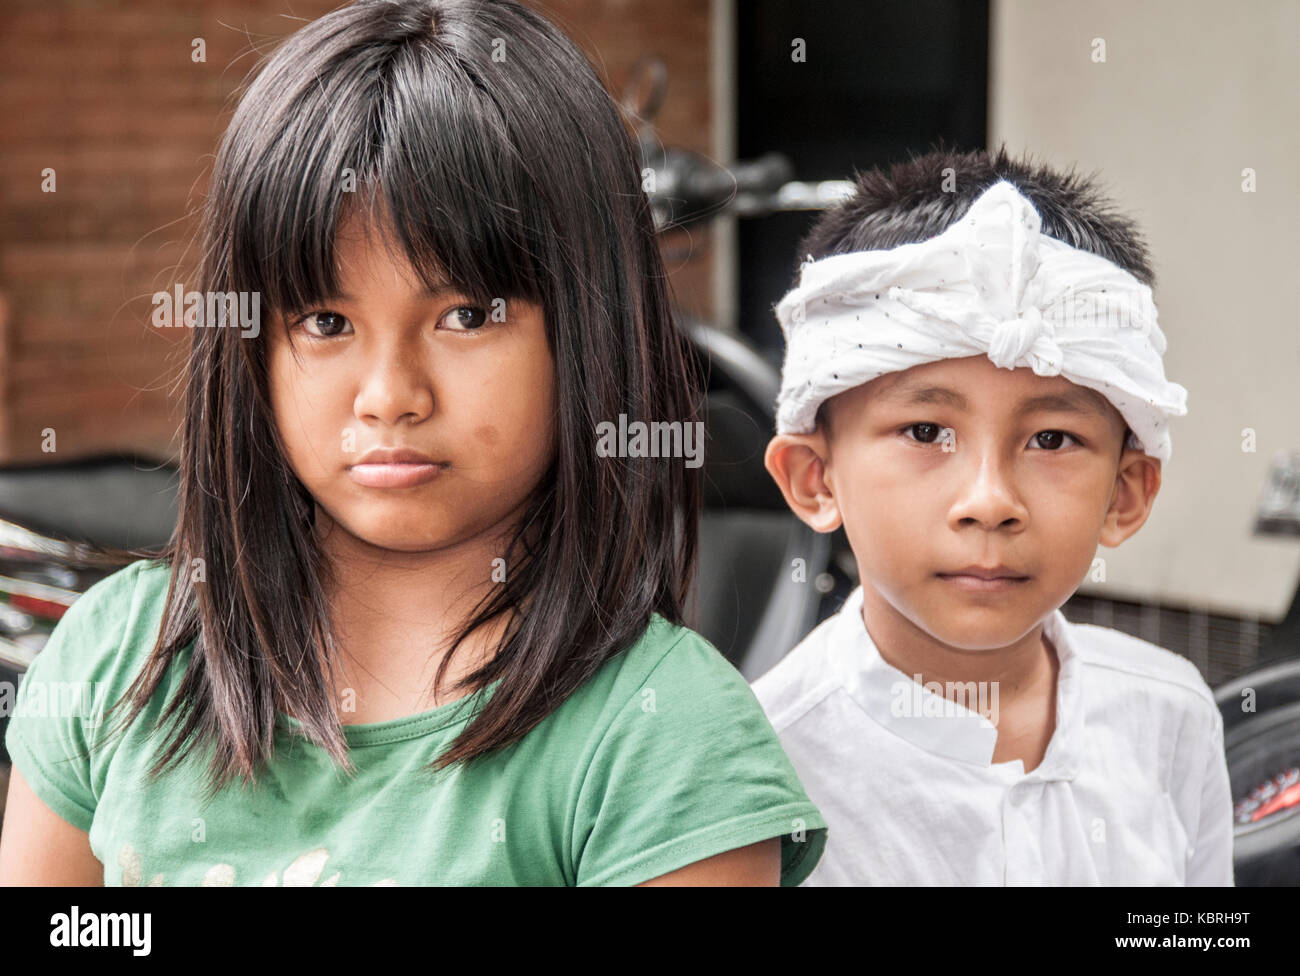 Balinese boy and girl watching a procession in Ubud, the island's cultural capital. The boy wears ceremonial costume. Stock Photo